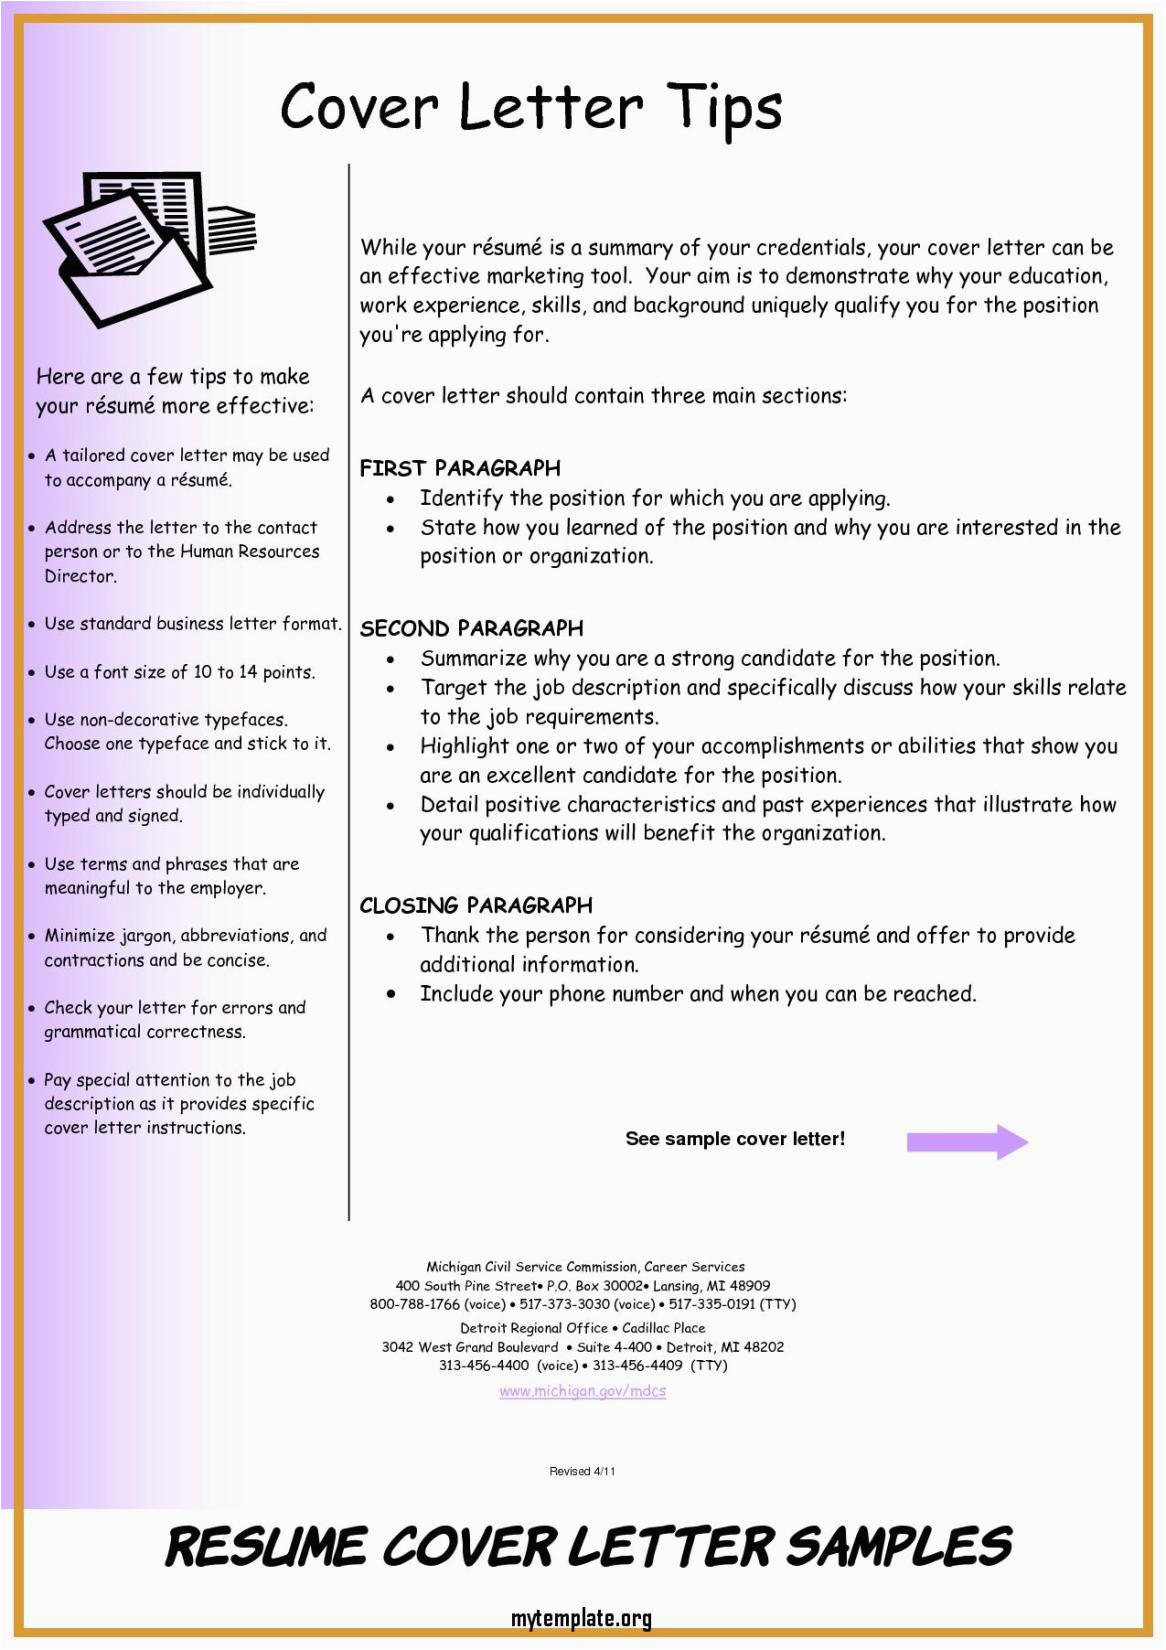 Sample Cover Letter and Resume In One Document Resume Cover Letter Samples Cover Letters are E